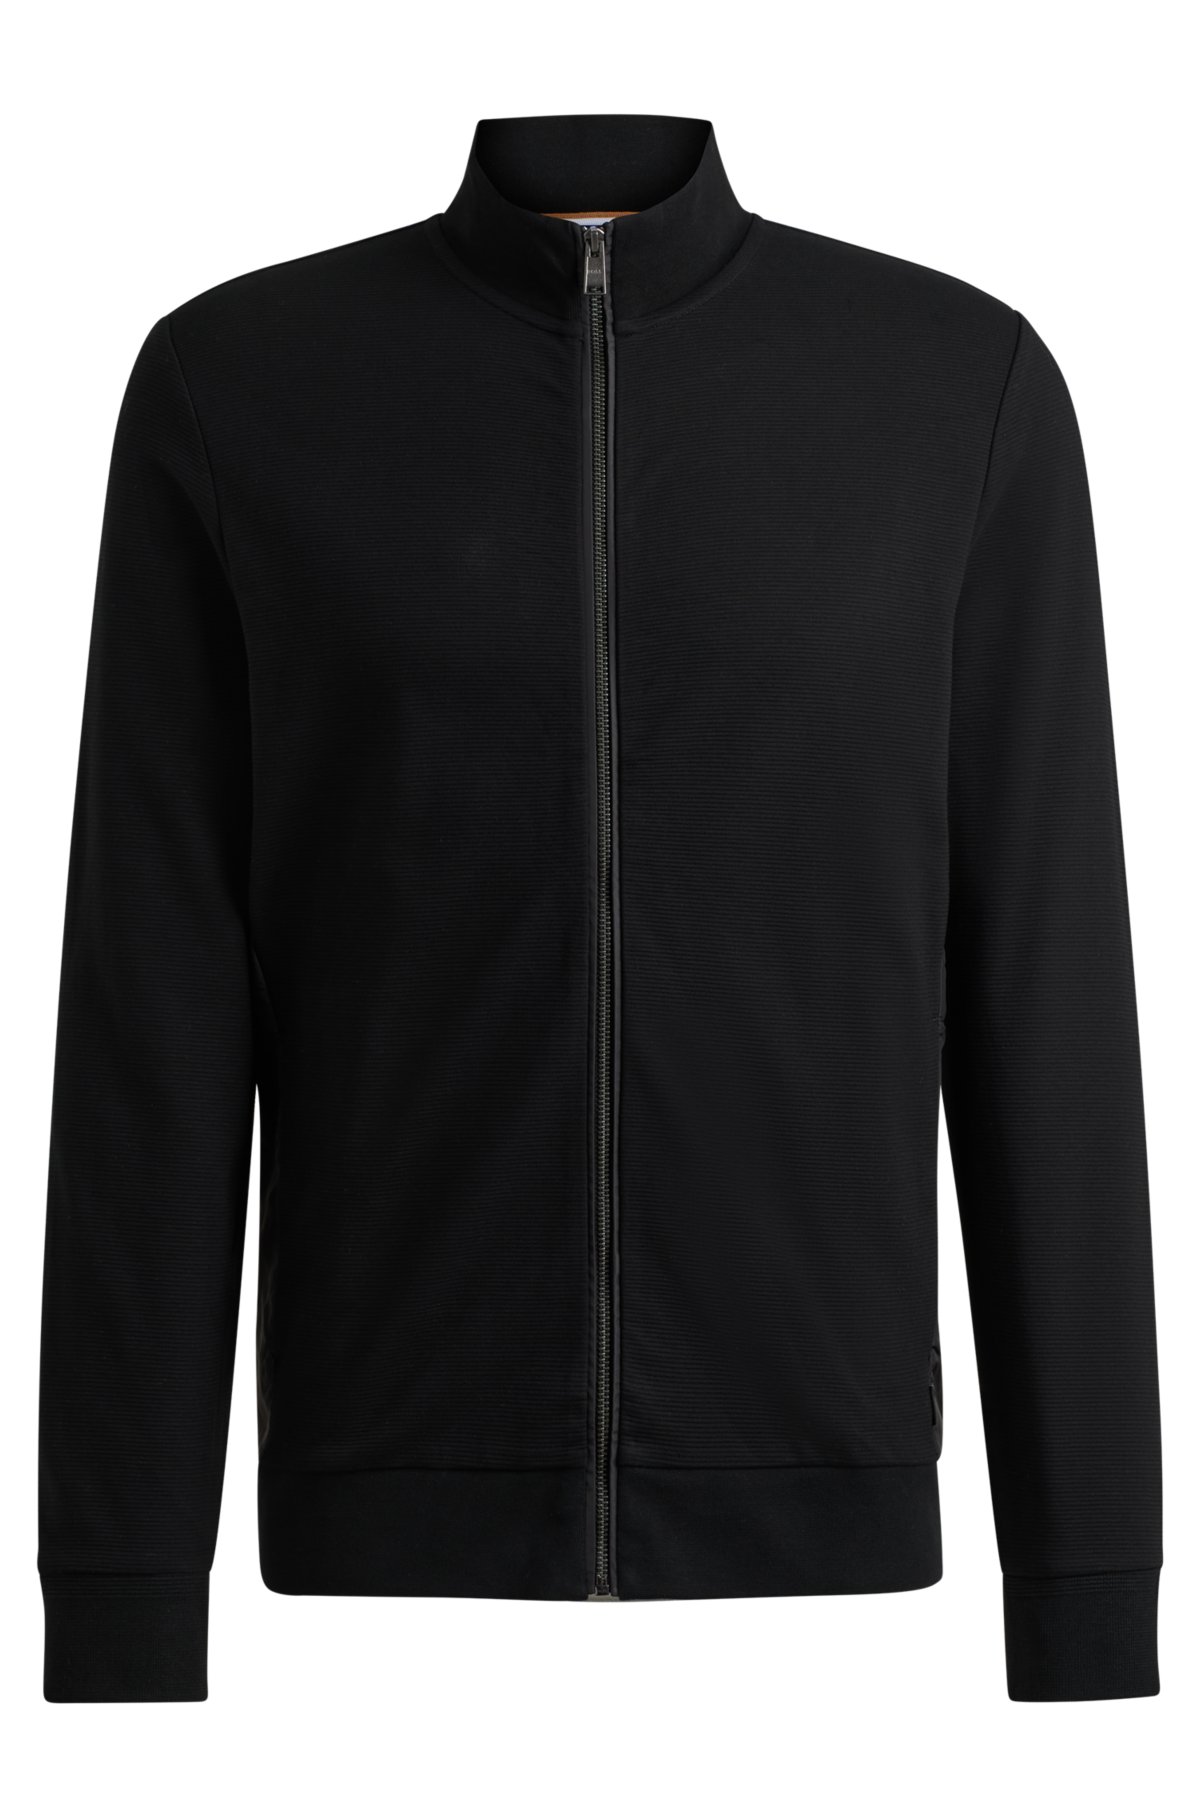 BOSS - Mercerised-cotton zip-up jacket with piping details